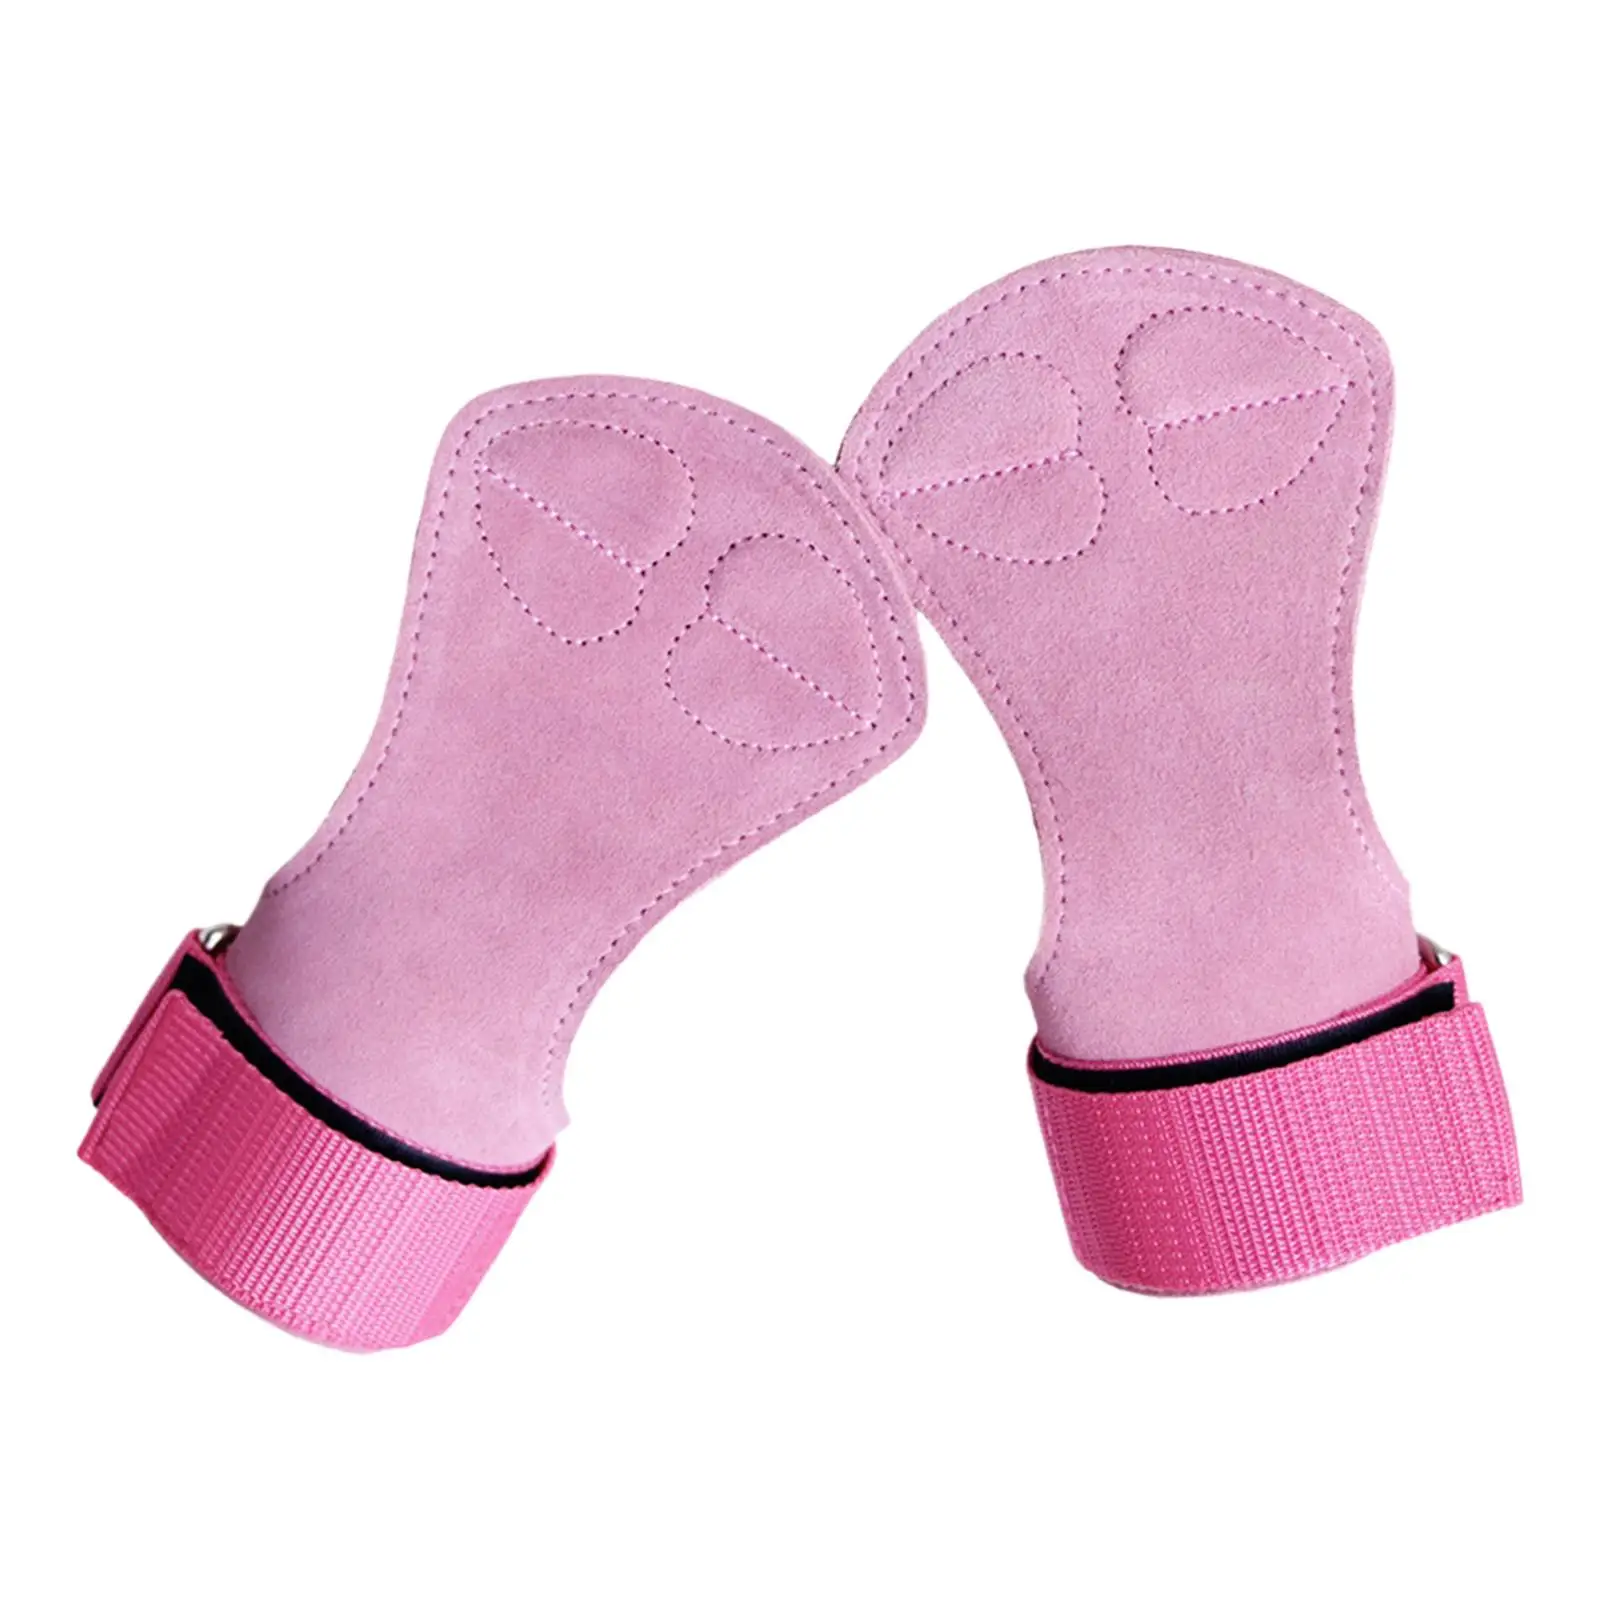 Anti Skid Workout Gloves Powerlifting Support Weight Lifting Gloves for Weightlifting